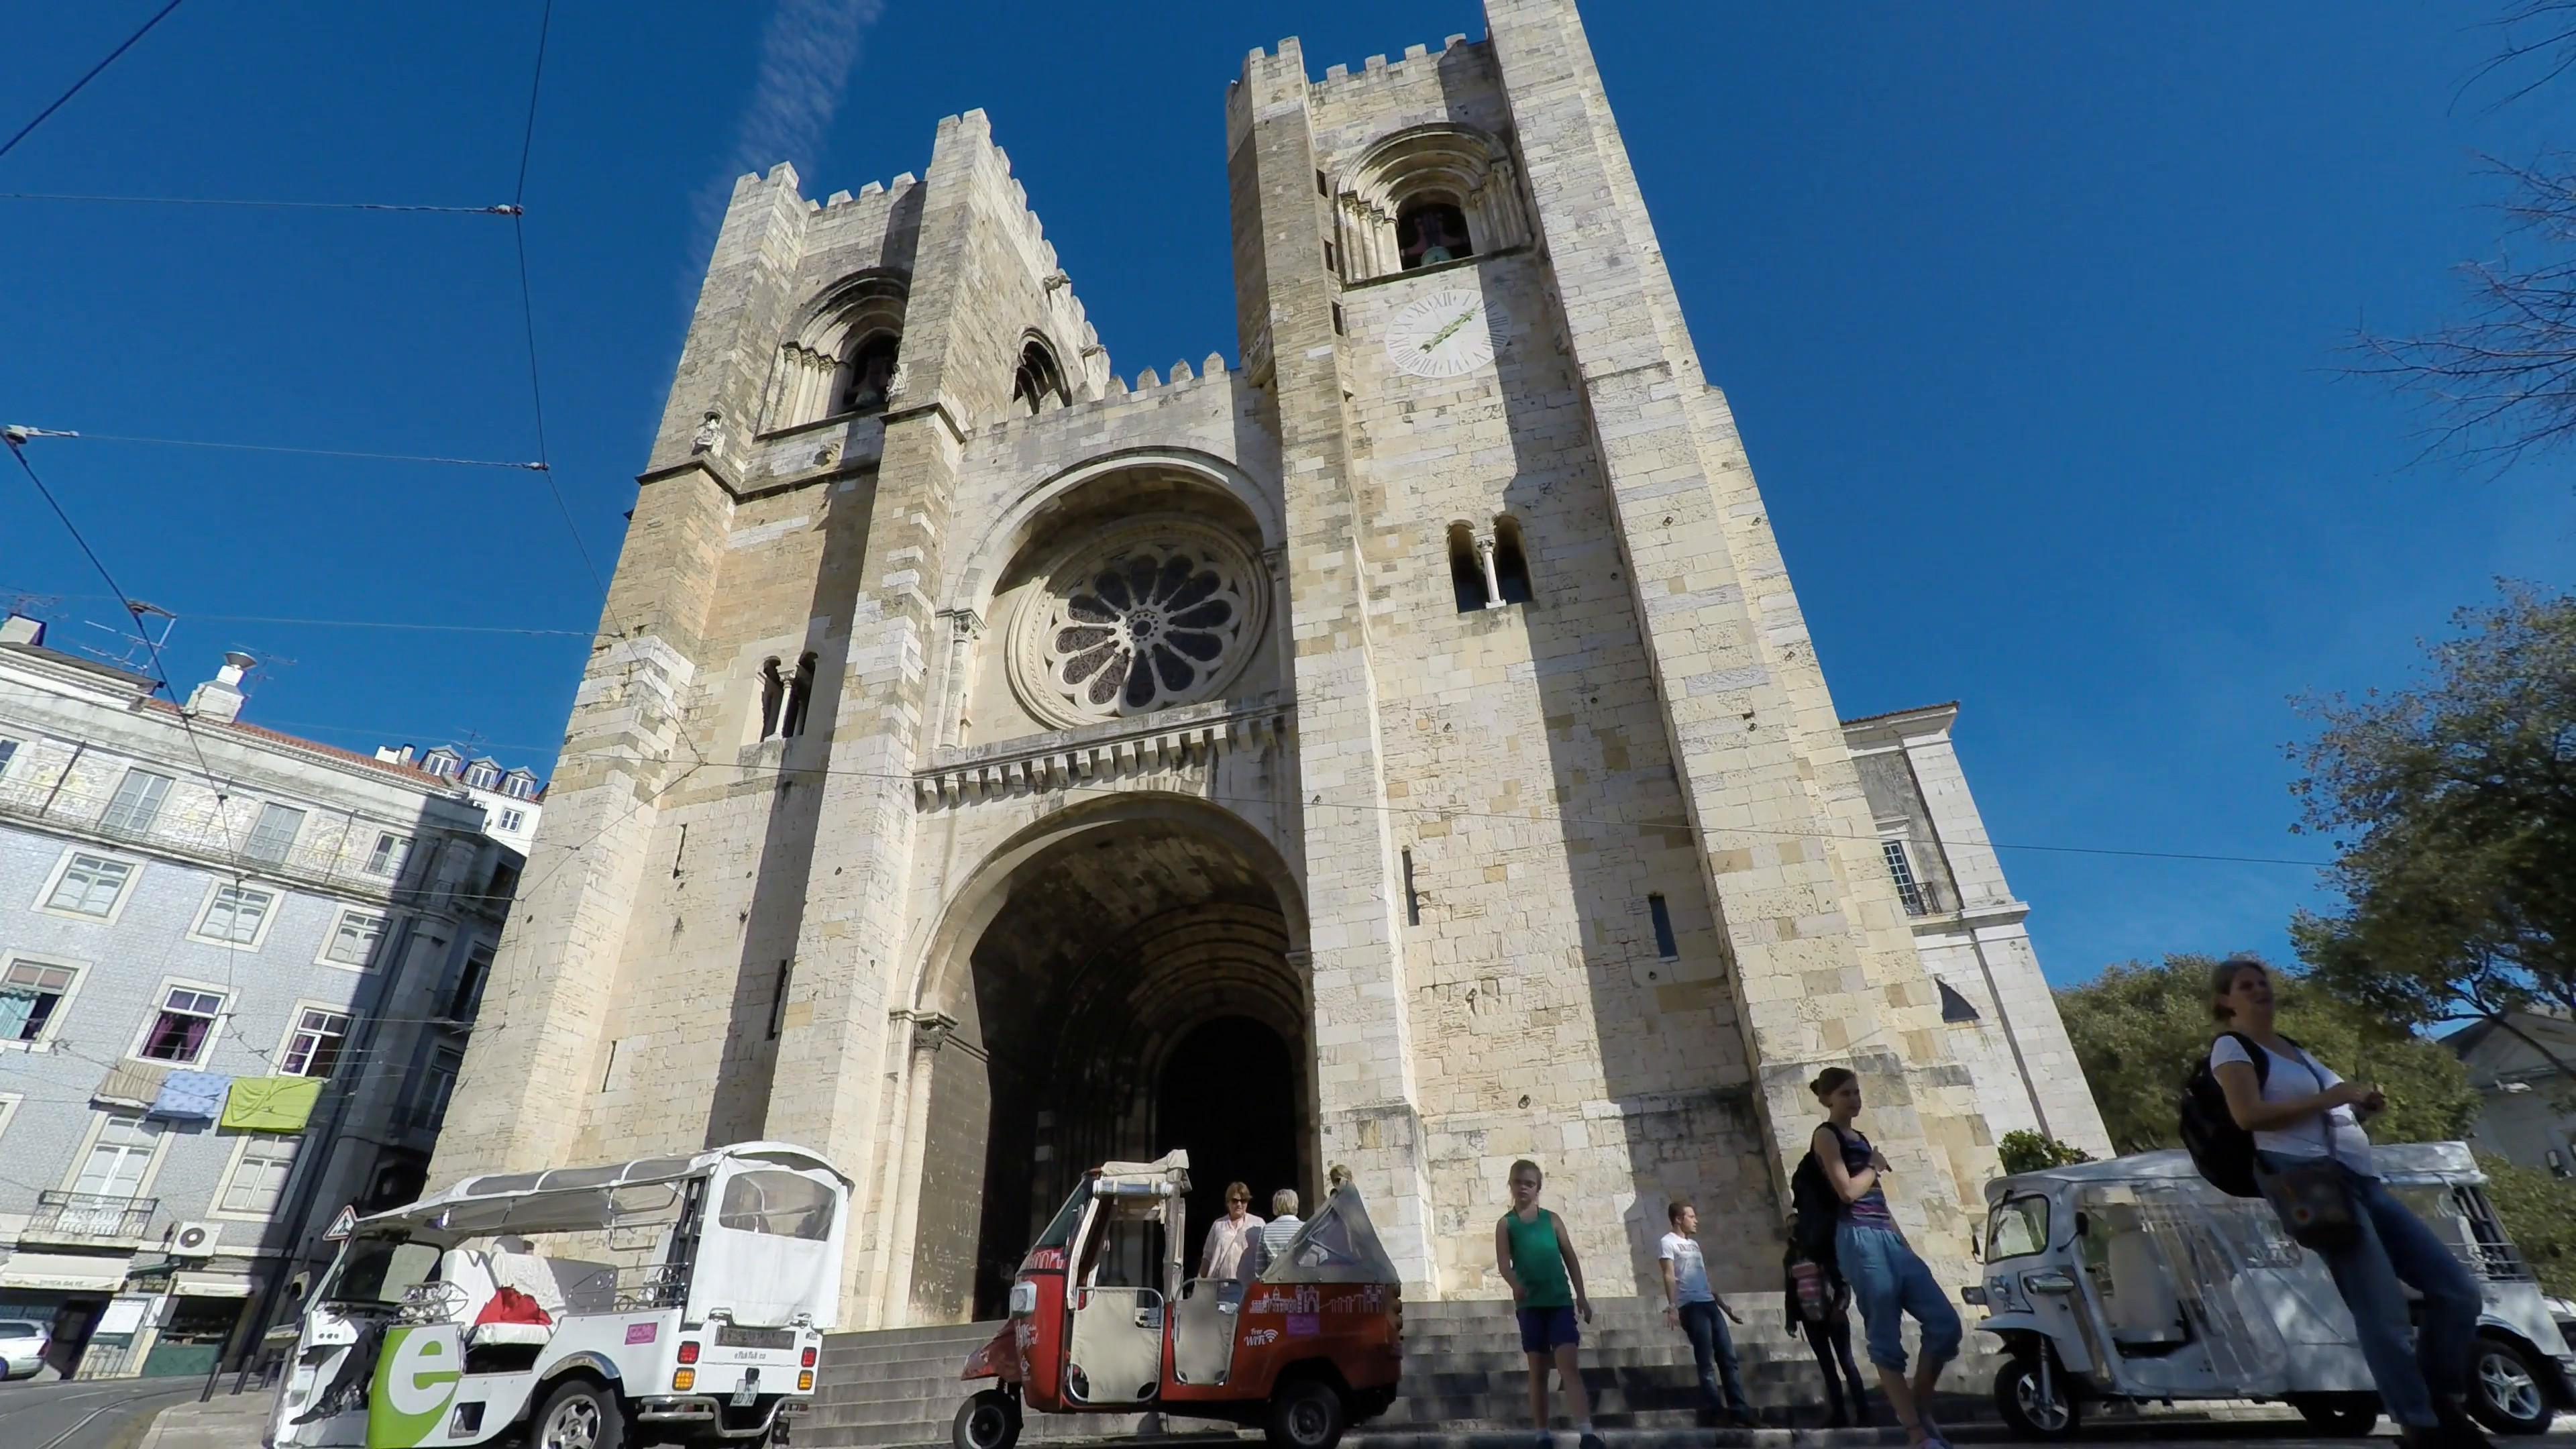 Tourists and tuk tuks in front of the Se Cathedral LISBON, PORTUGAL ...